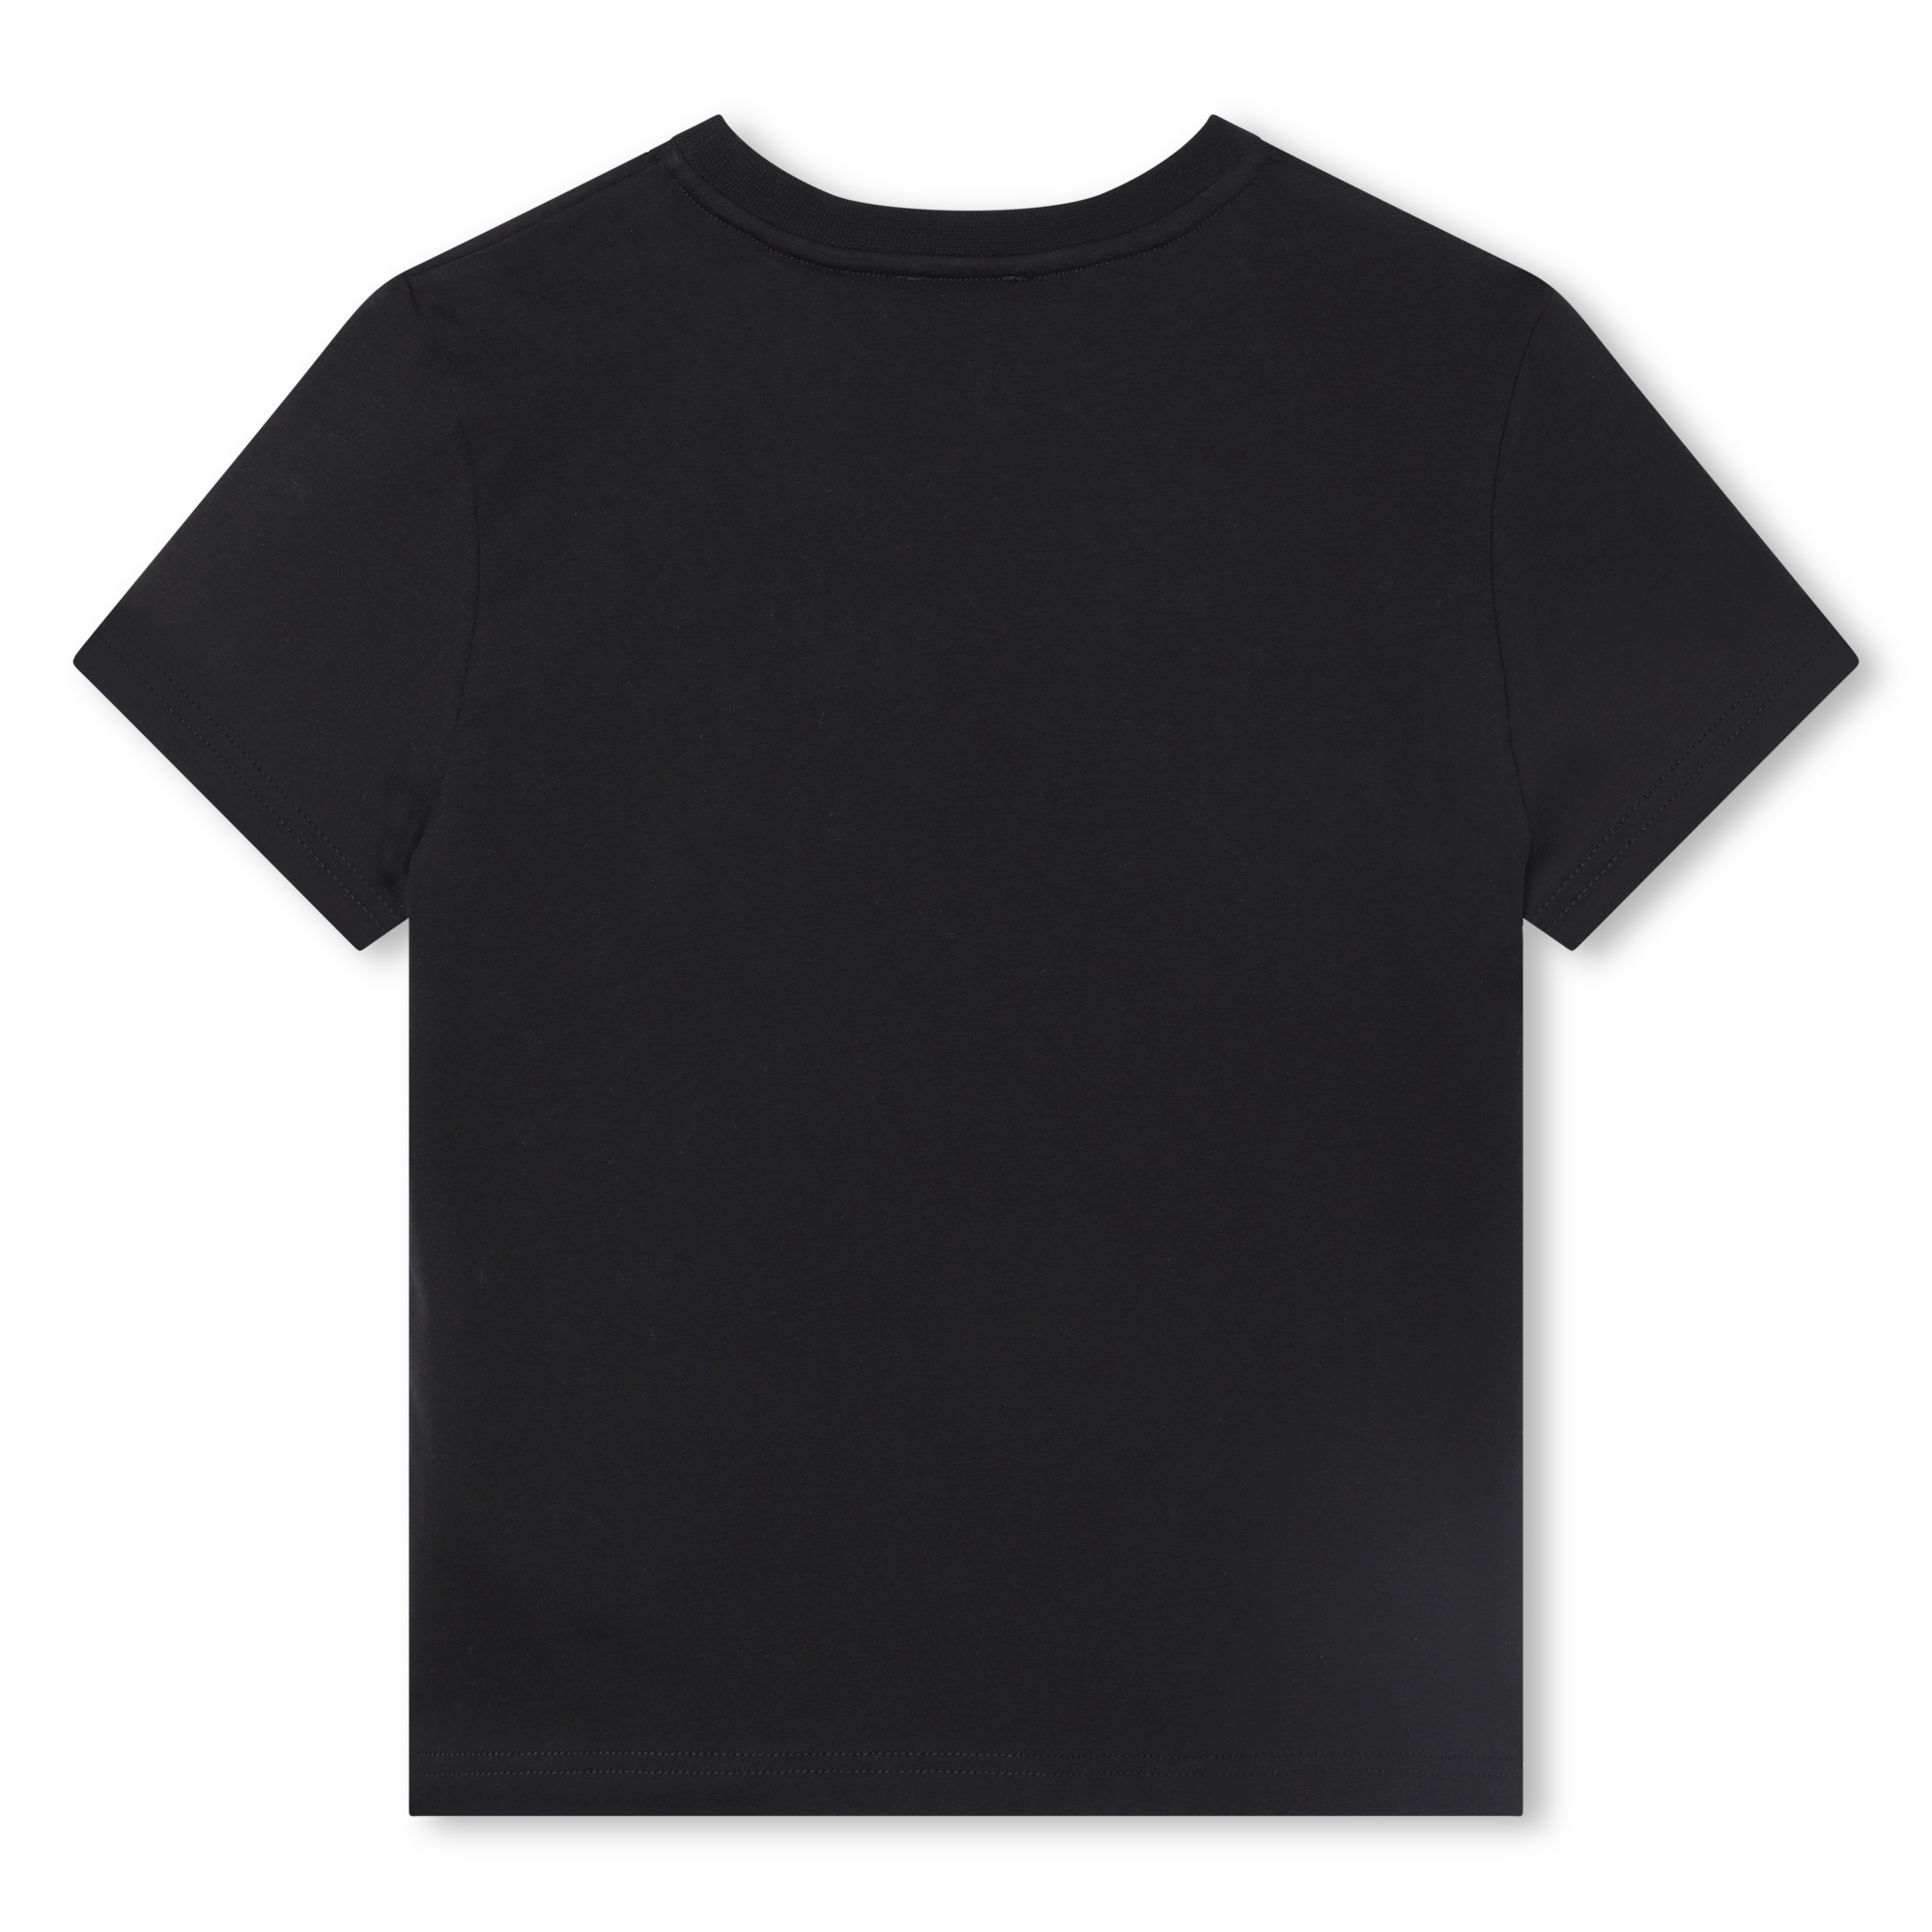 Short-sleeved T-shirt GIVENCHY for BOY